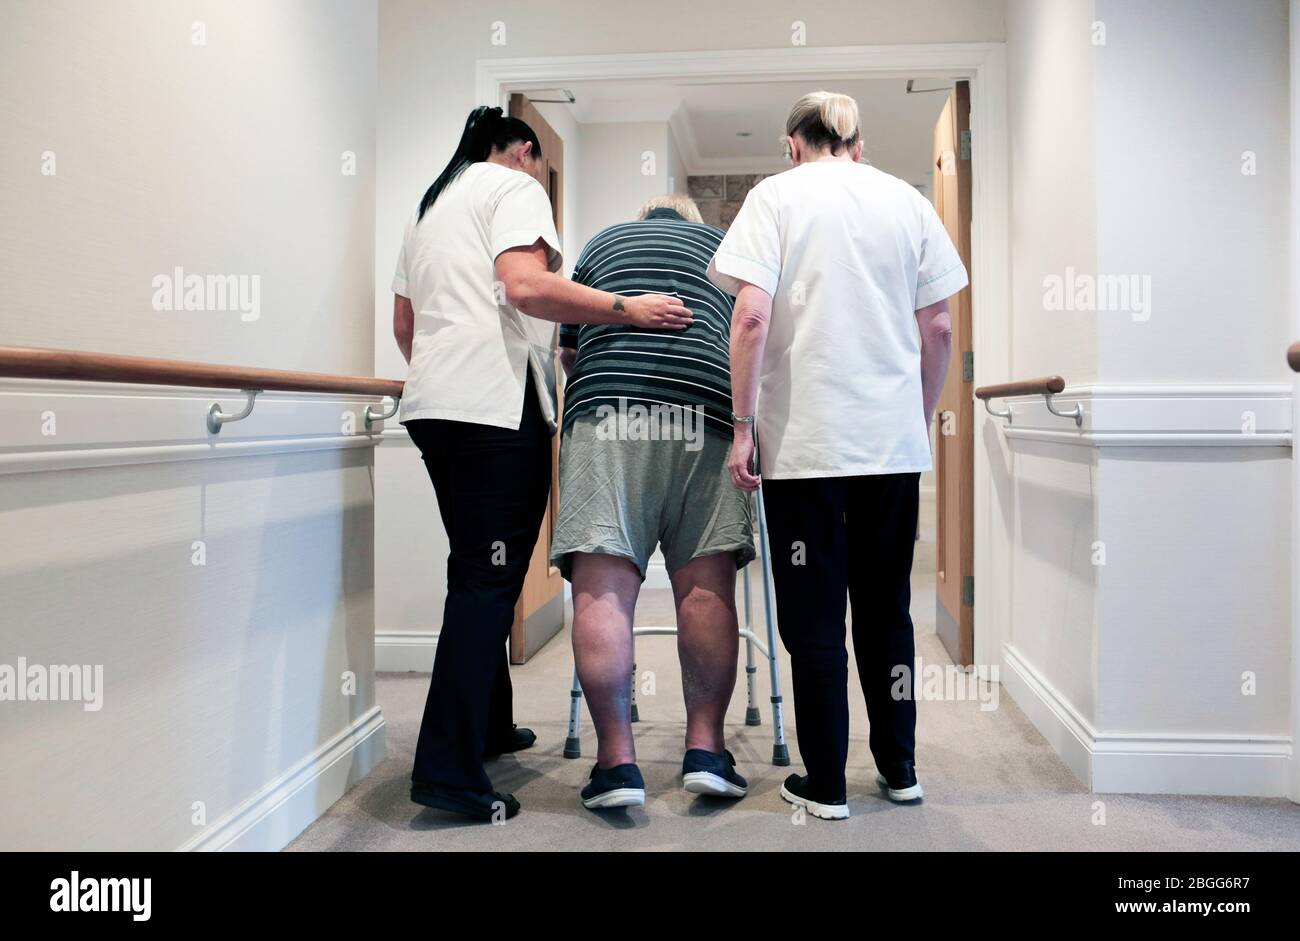 Staff assist a man using a zimmer frame at a residential care home in Redcar, UK. 2/2/2018.  Photograph: Stuart Bolton. Stock Photo